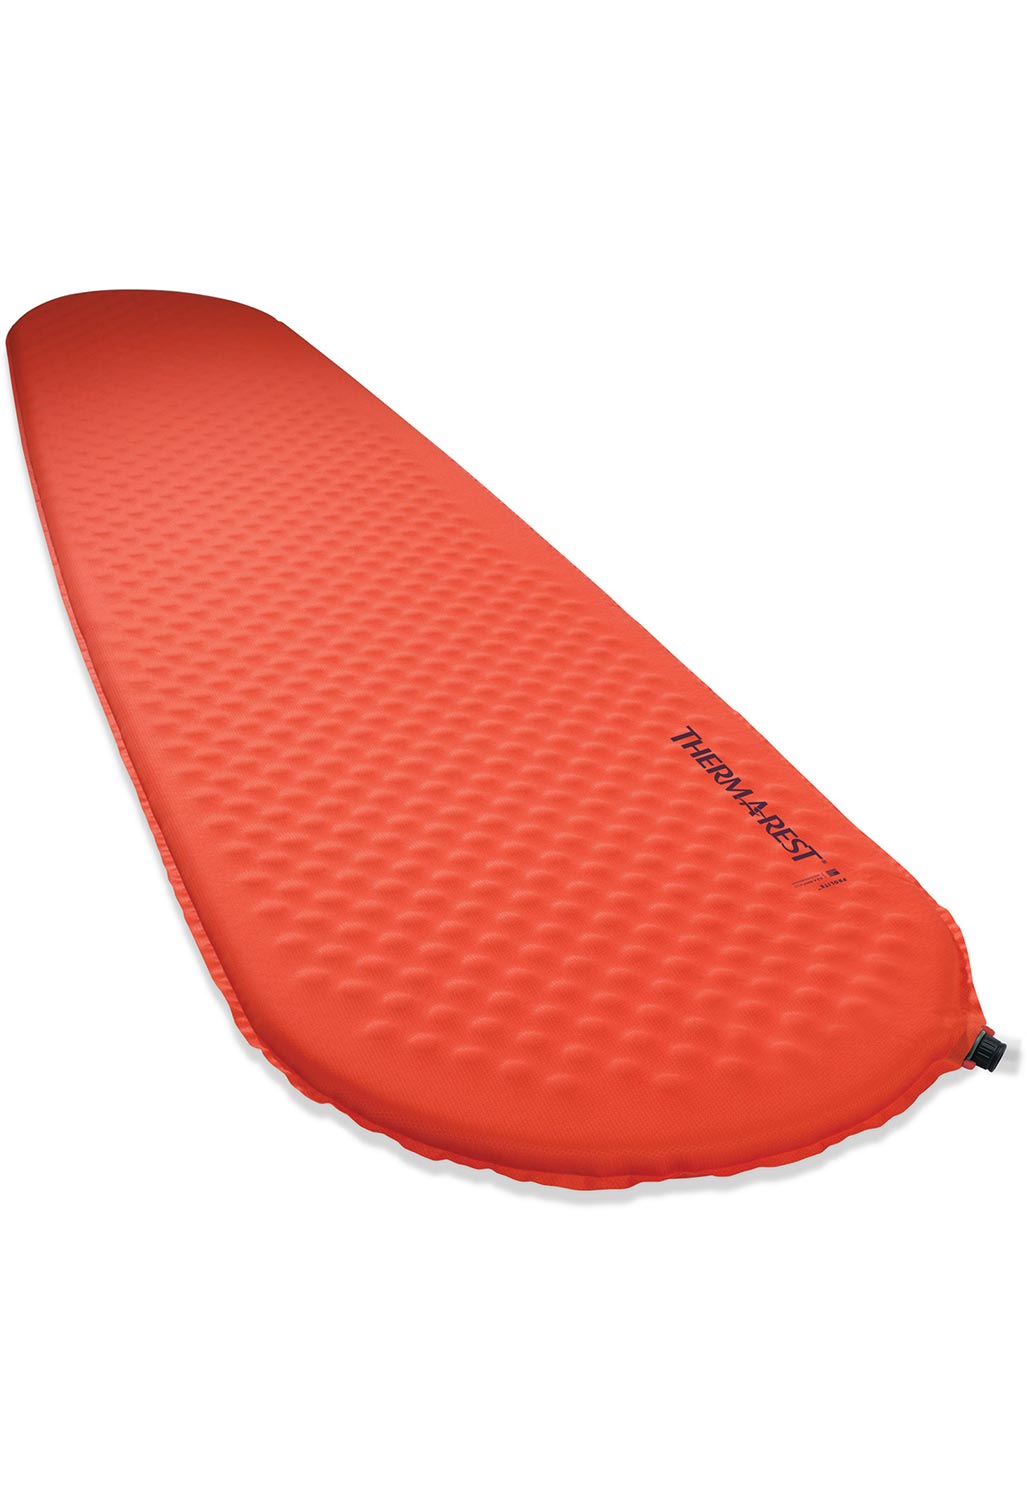 Therm-a-Rest ProLite Large Camping Mat - Poppy